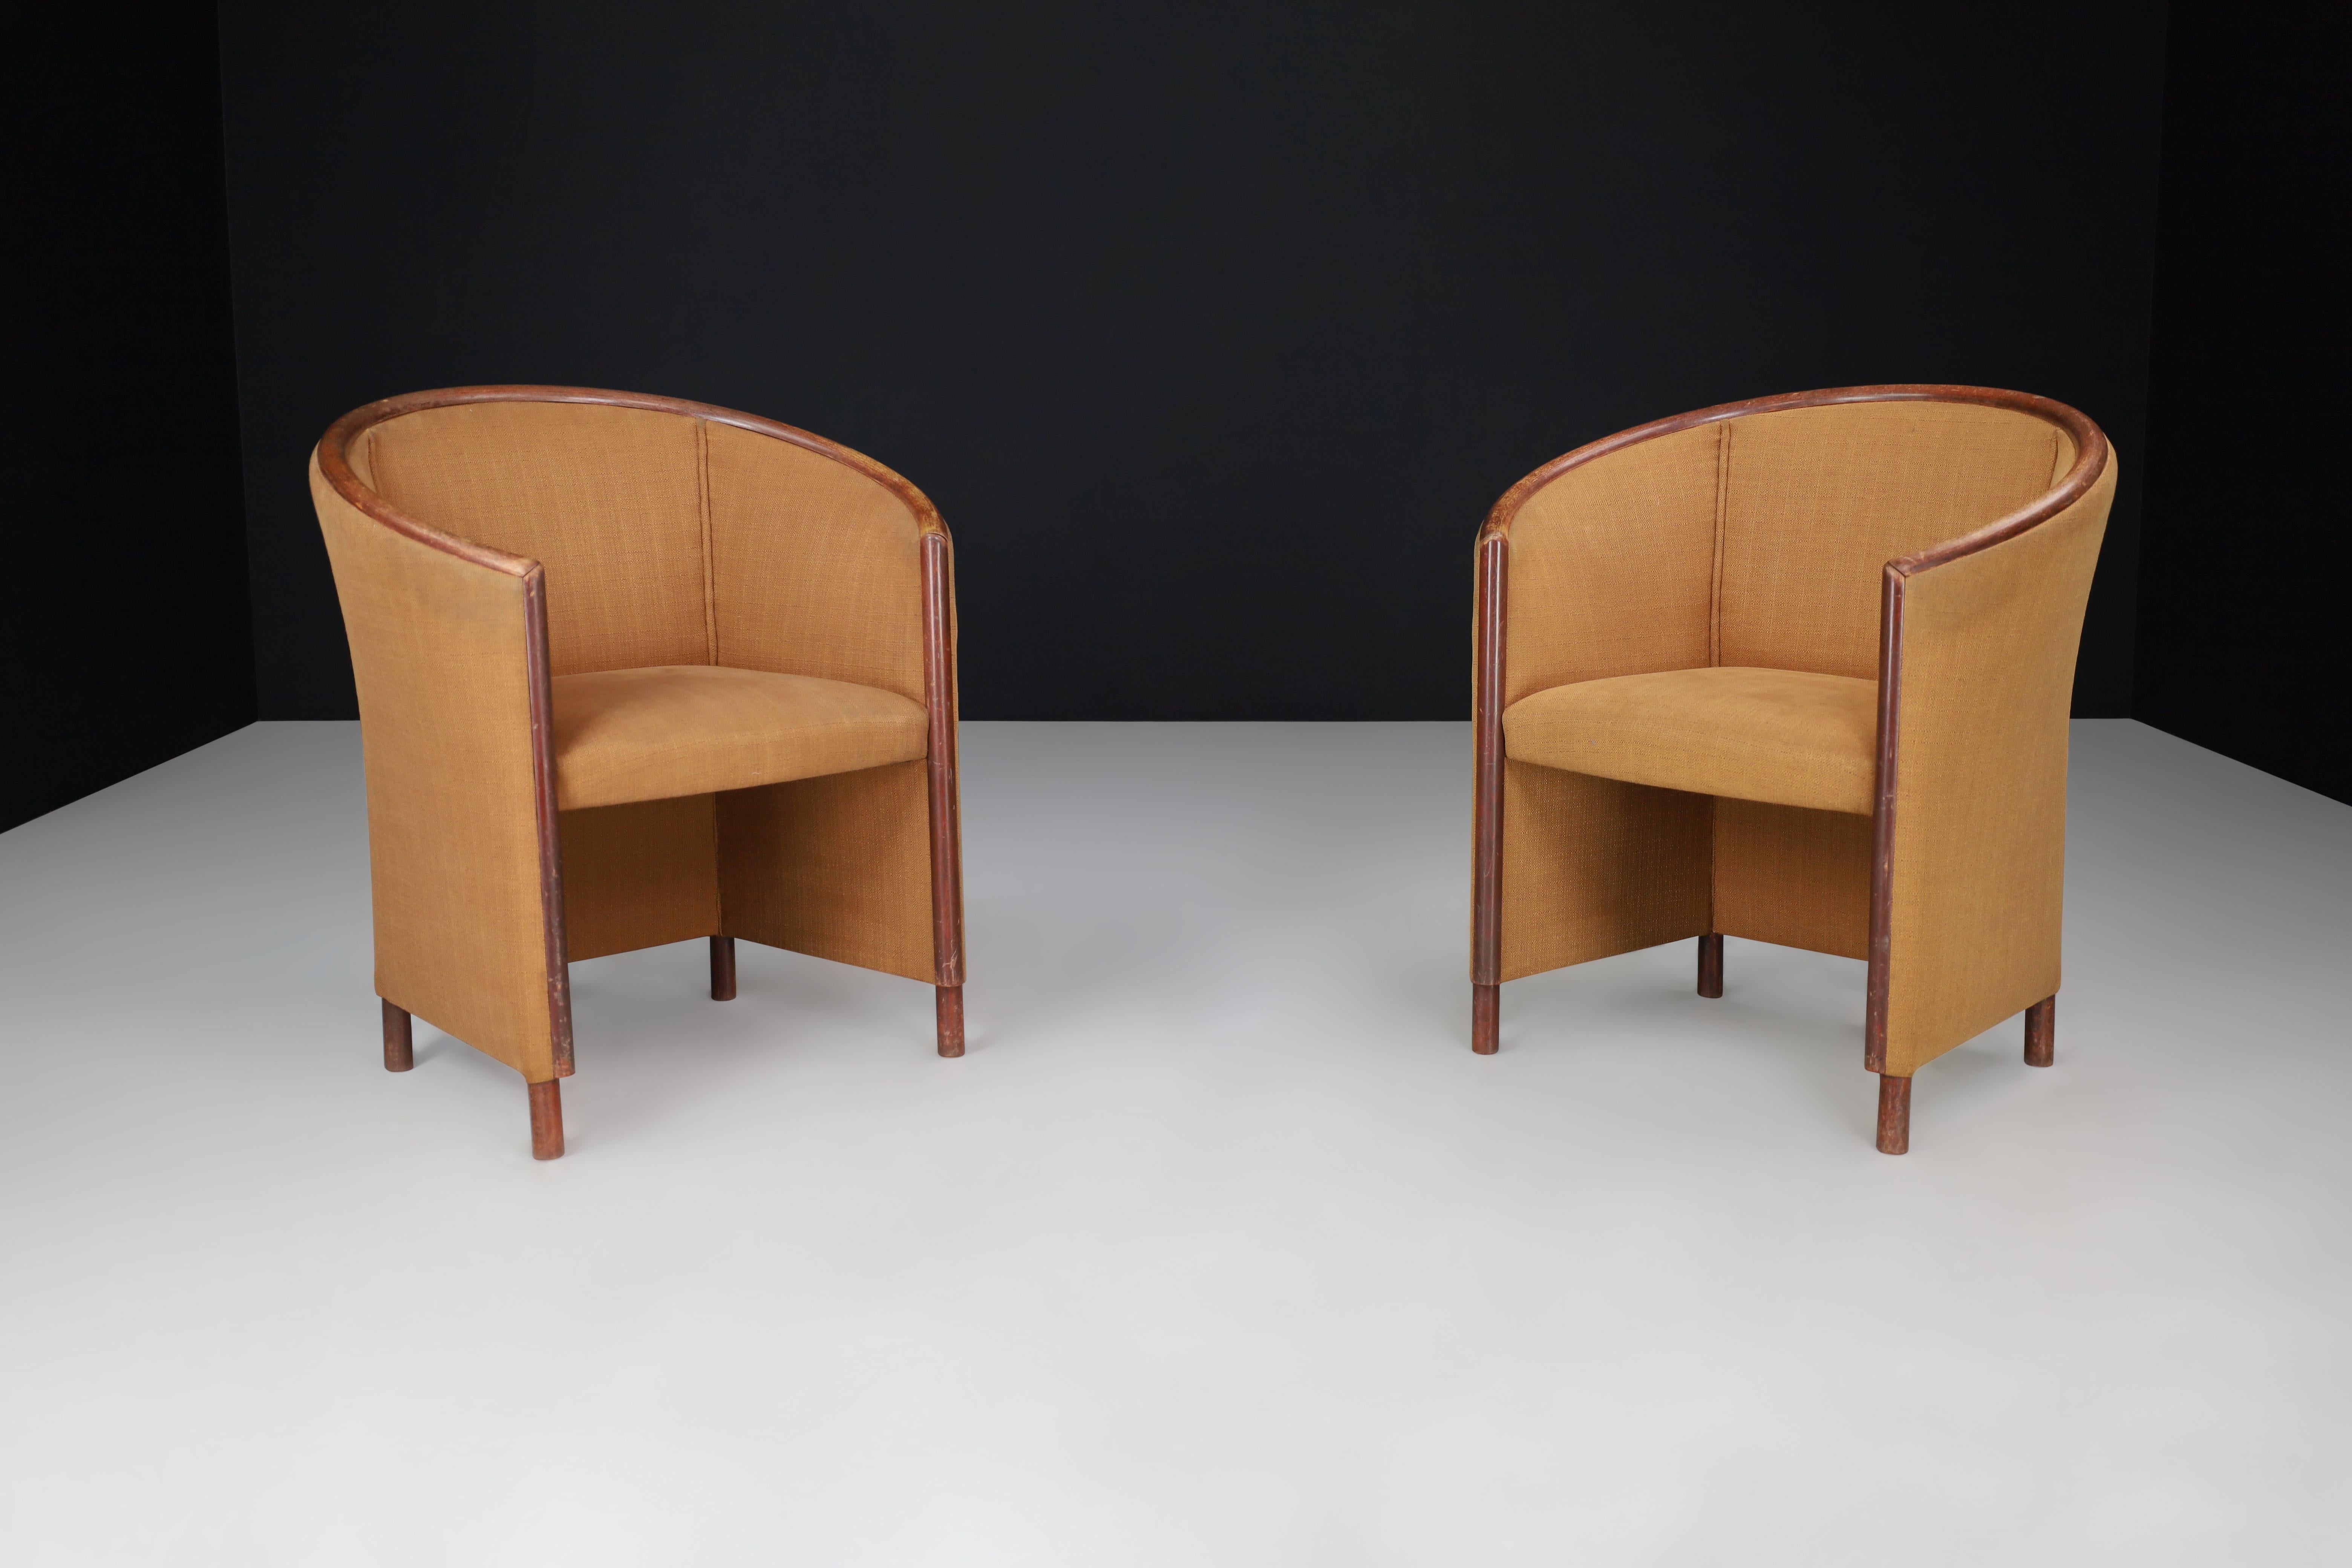 Ton Armchairs or Club chairs in Bentwood and Camel Upholstery Czech Republic 1970s

Ton in the Czech Republic manufactured this set of elegant armchairs or club chairs from the 1970s. The chairs feature a beautiful bentwood frame and camel